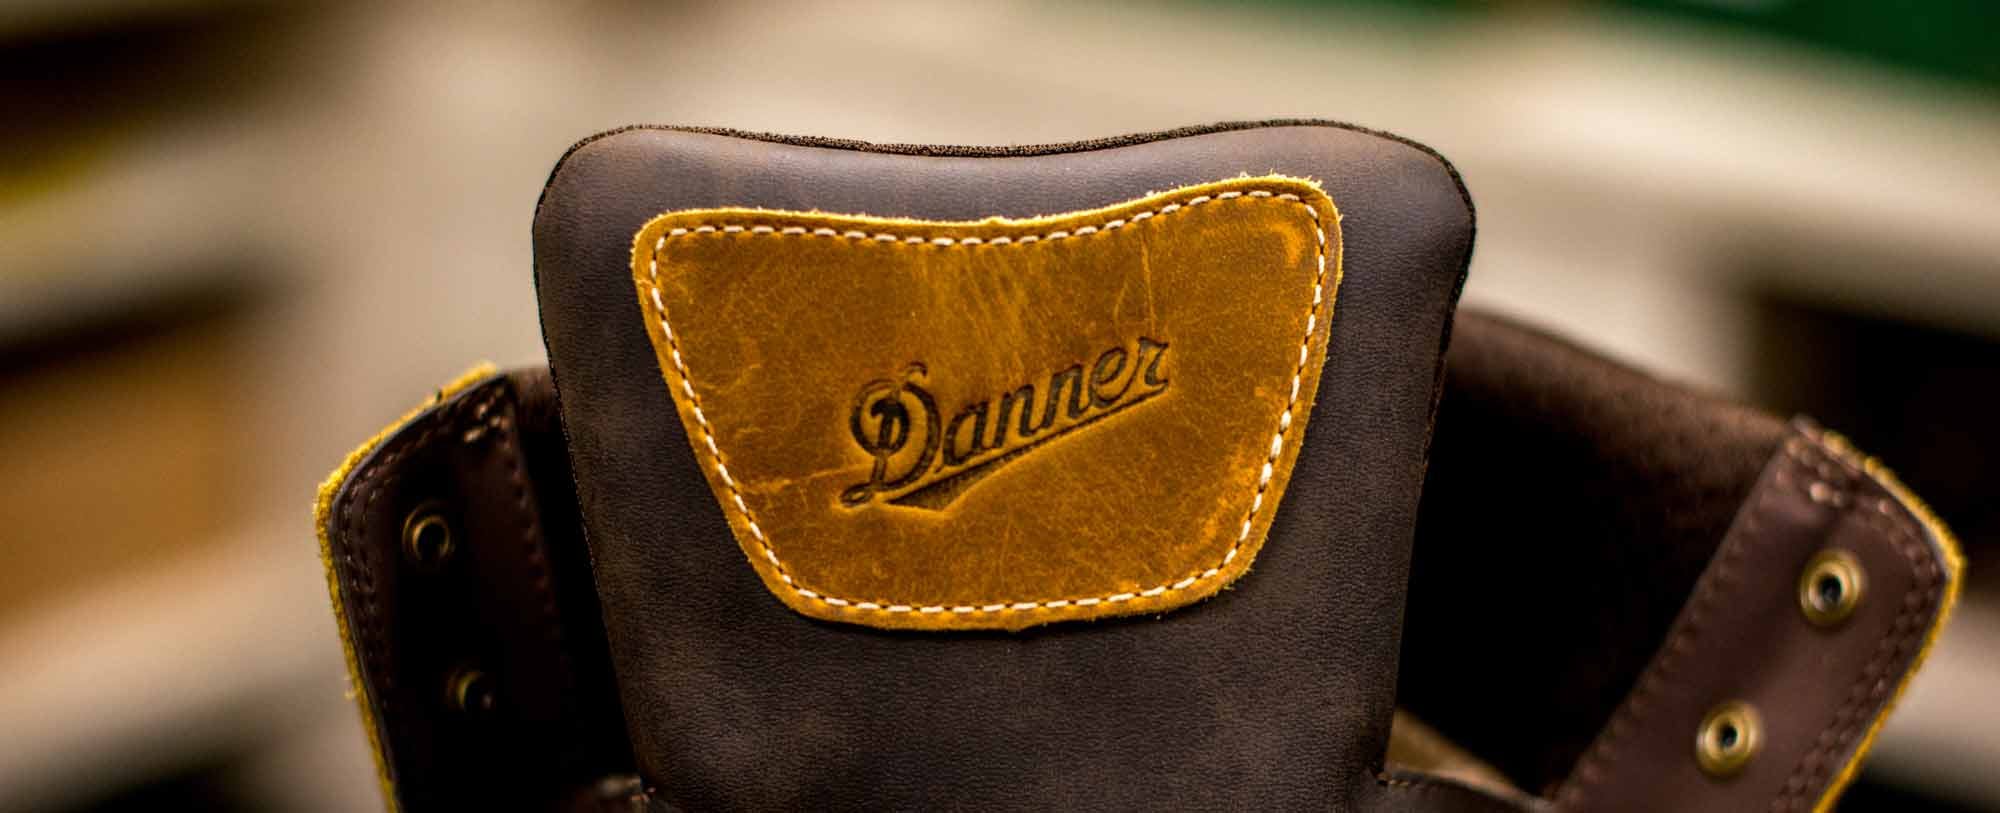 The Danner Difference: 85 Years in the Making